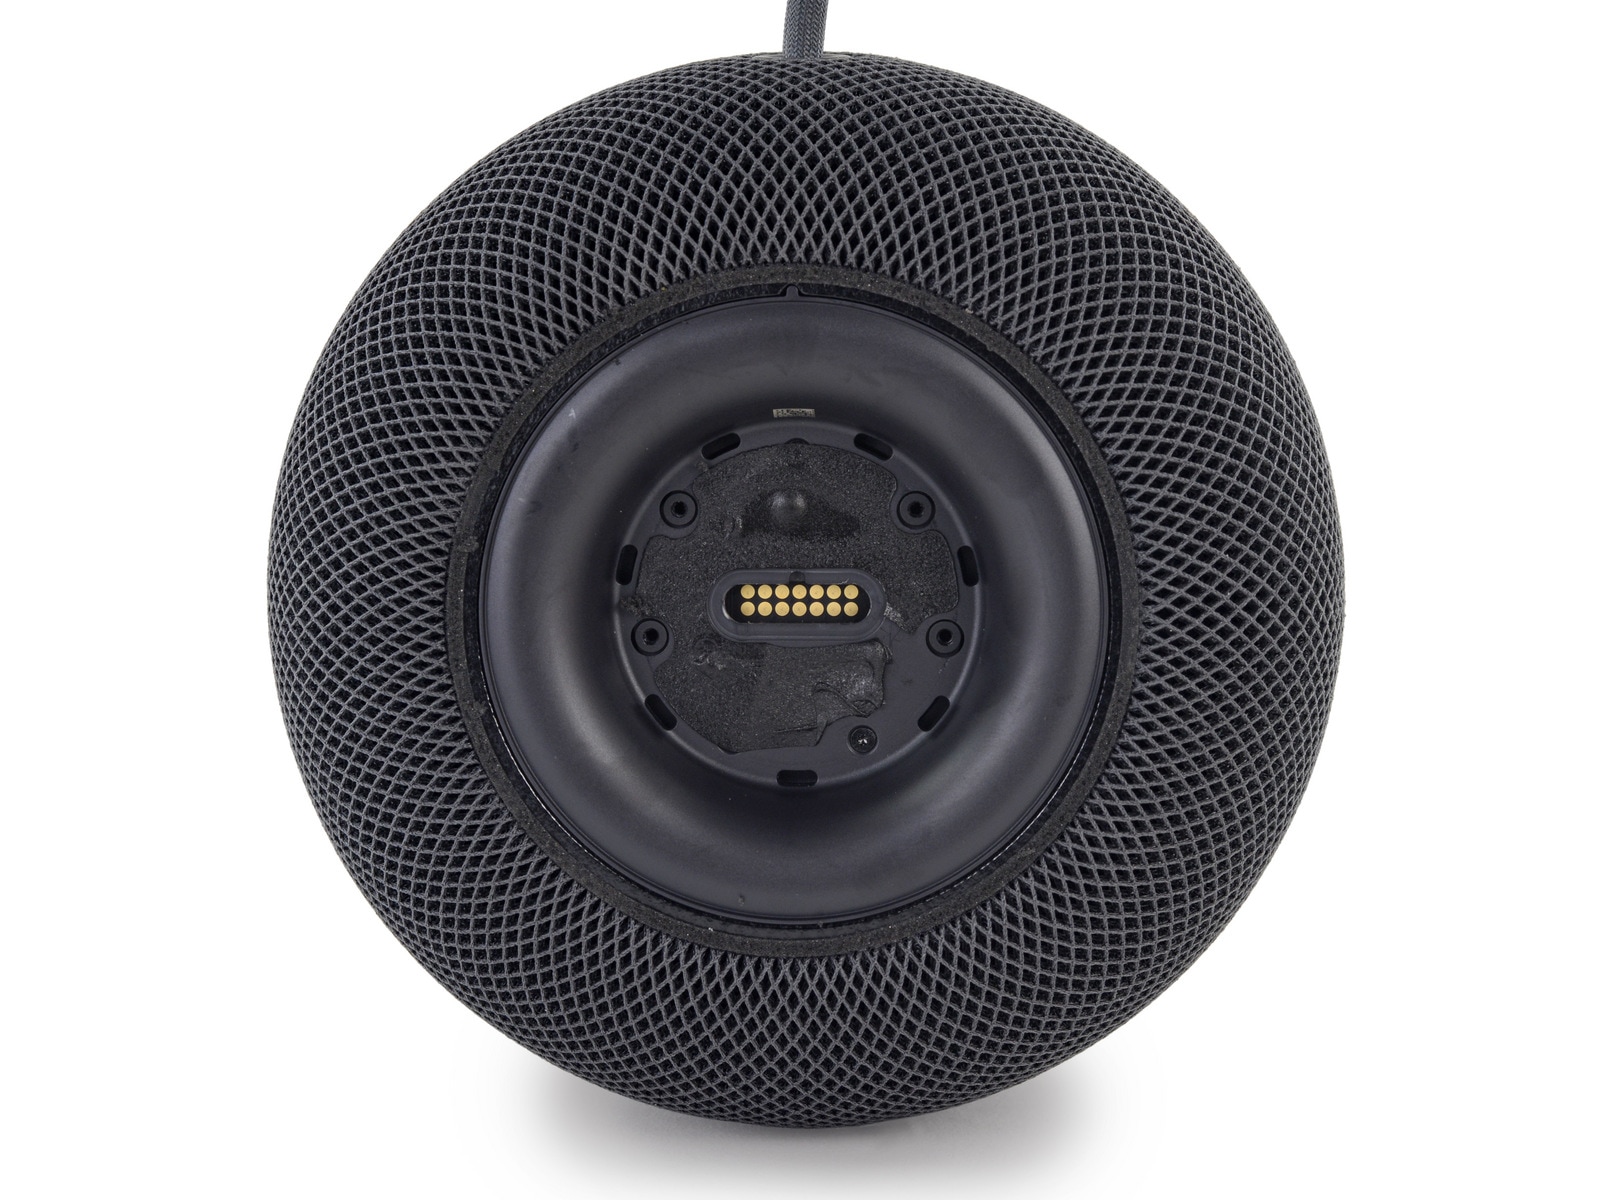 Disassembly of the HomePod by iFixit